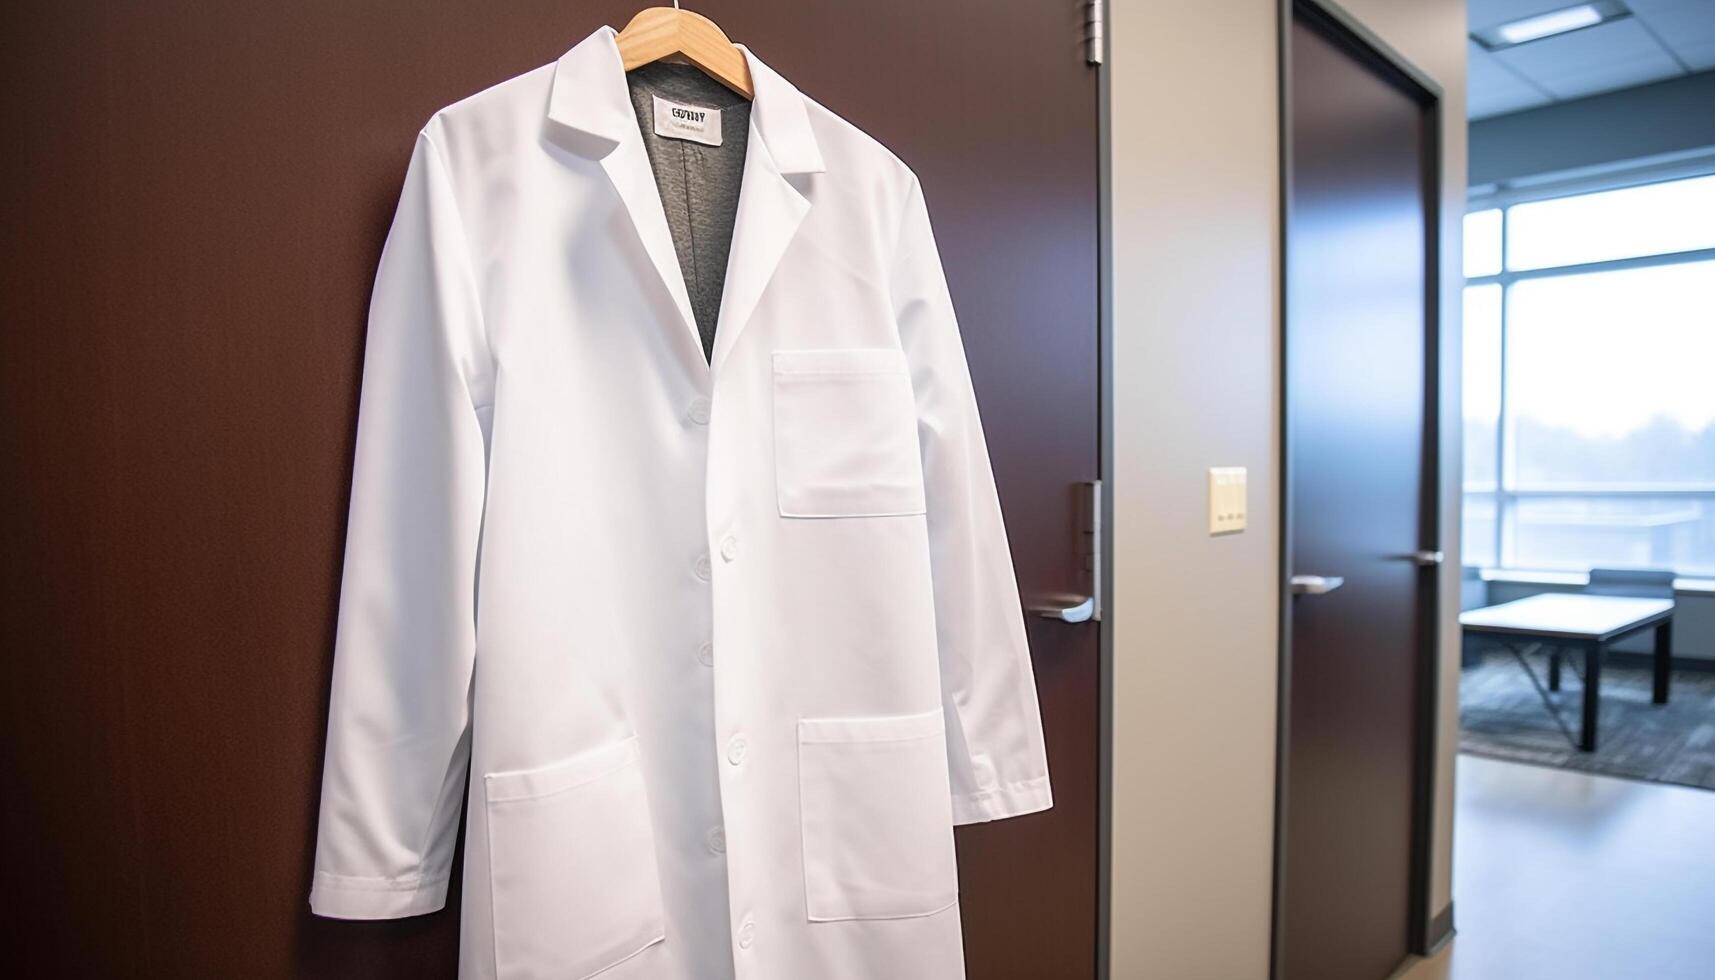 Modern healthcare expertise doctor lab coat and stethoscope in office photo